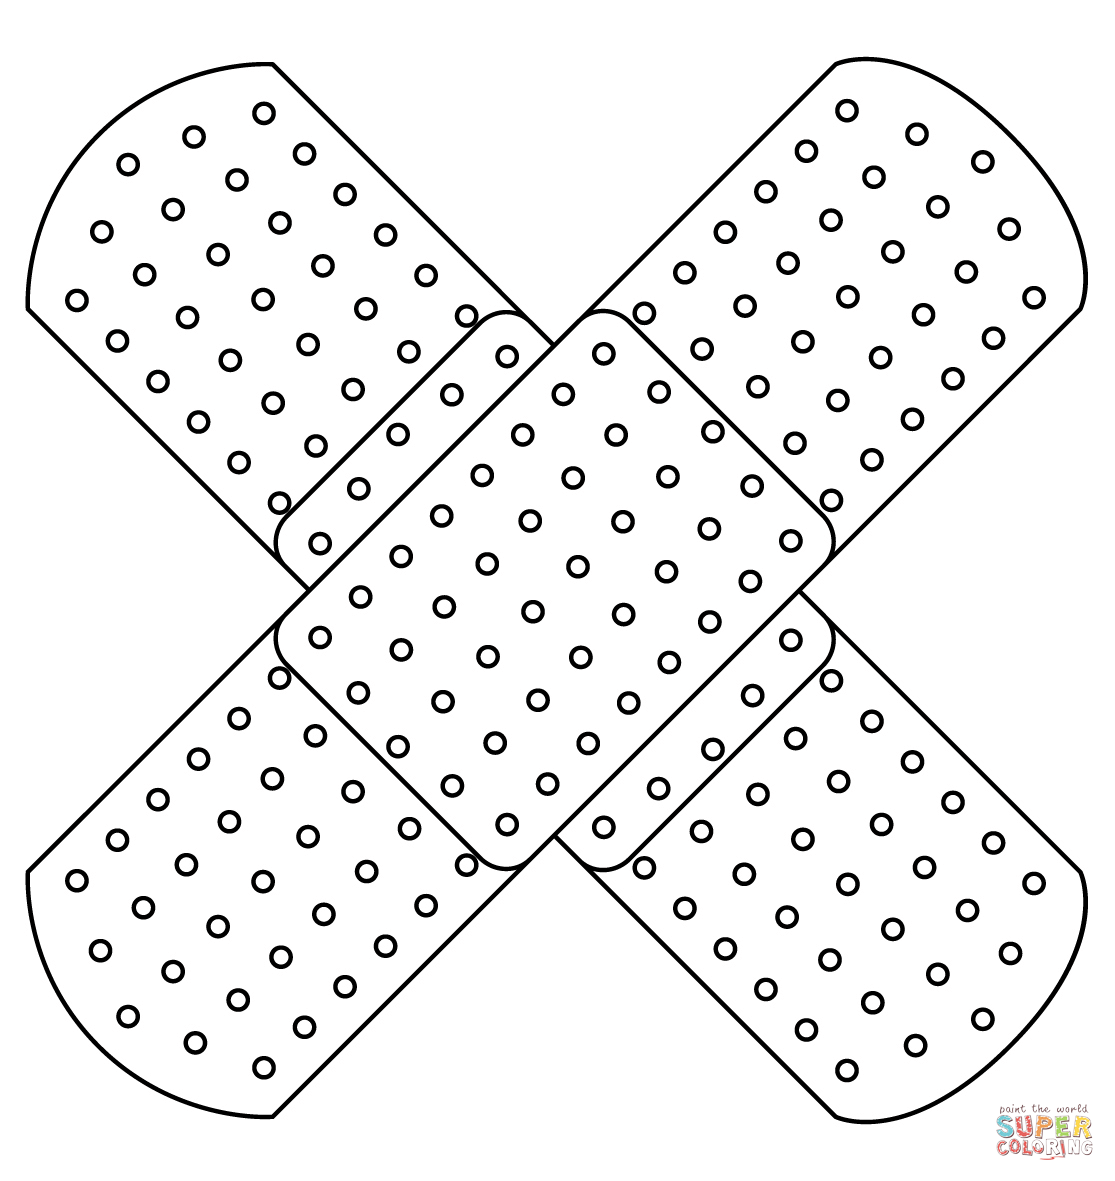 Band Aid coloring page | Free Printable Coloring Pages